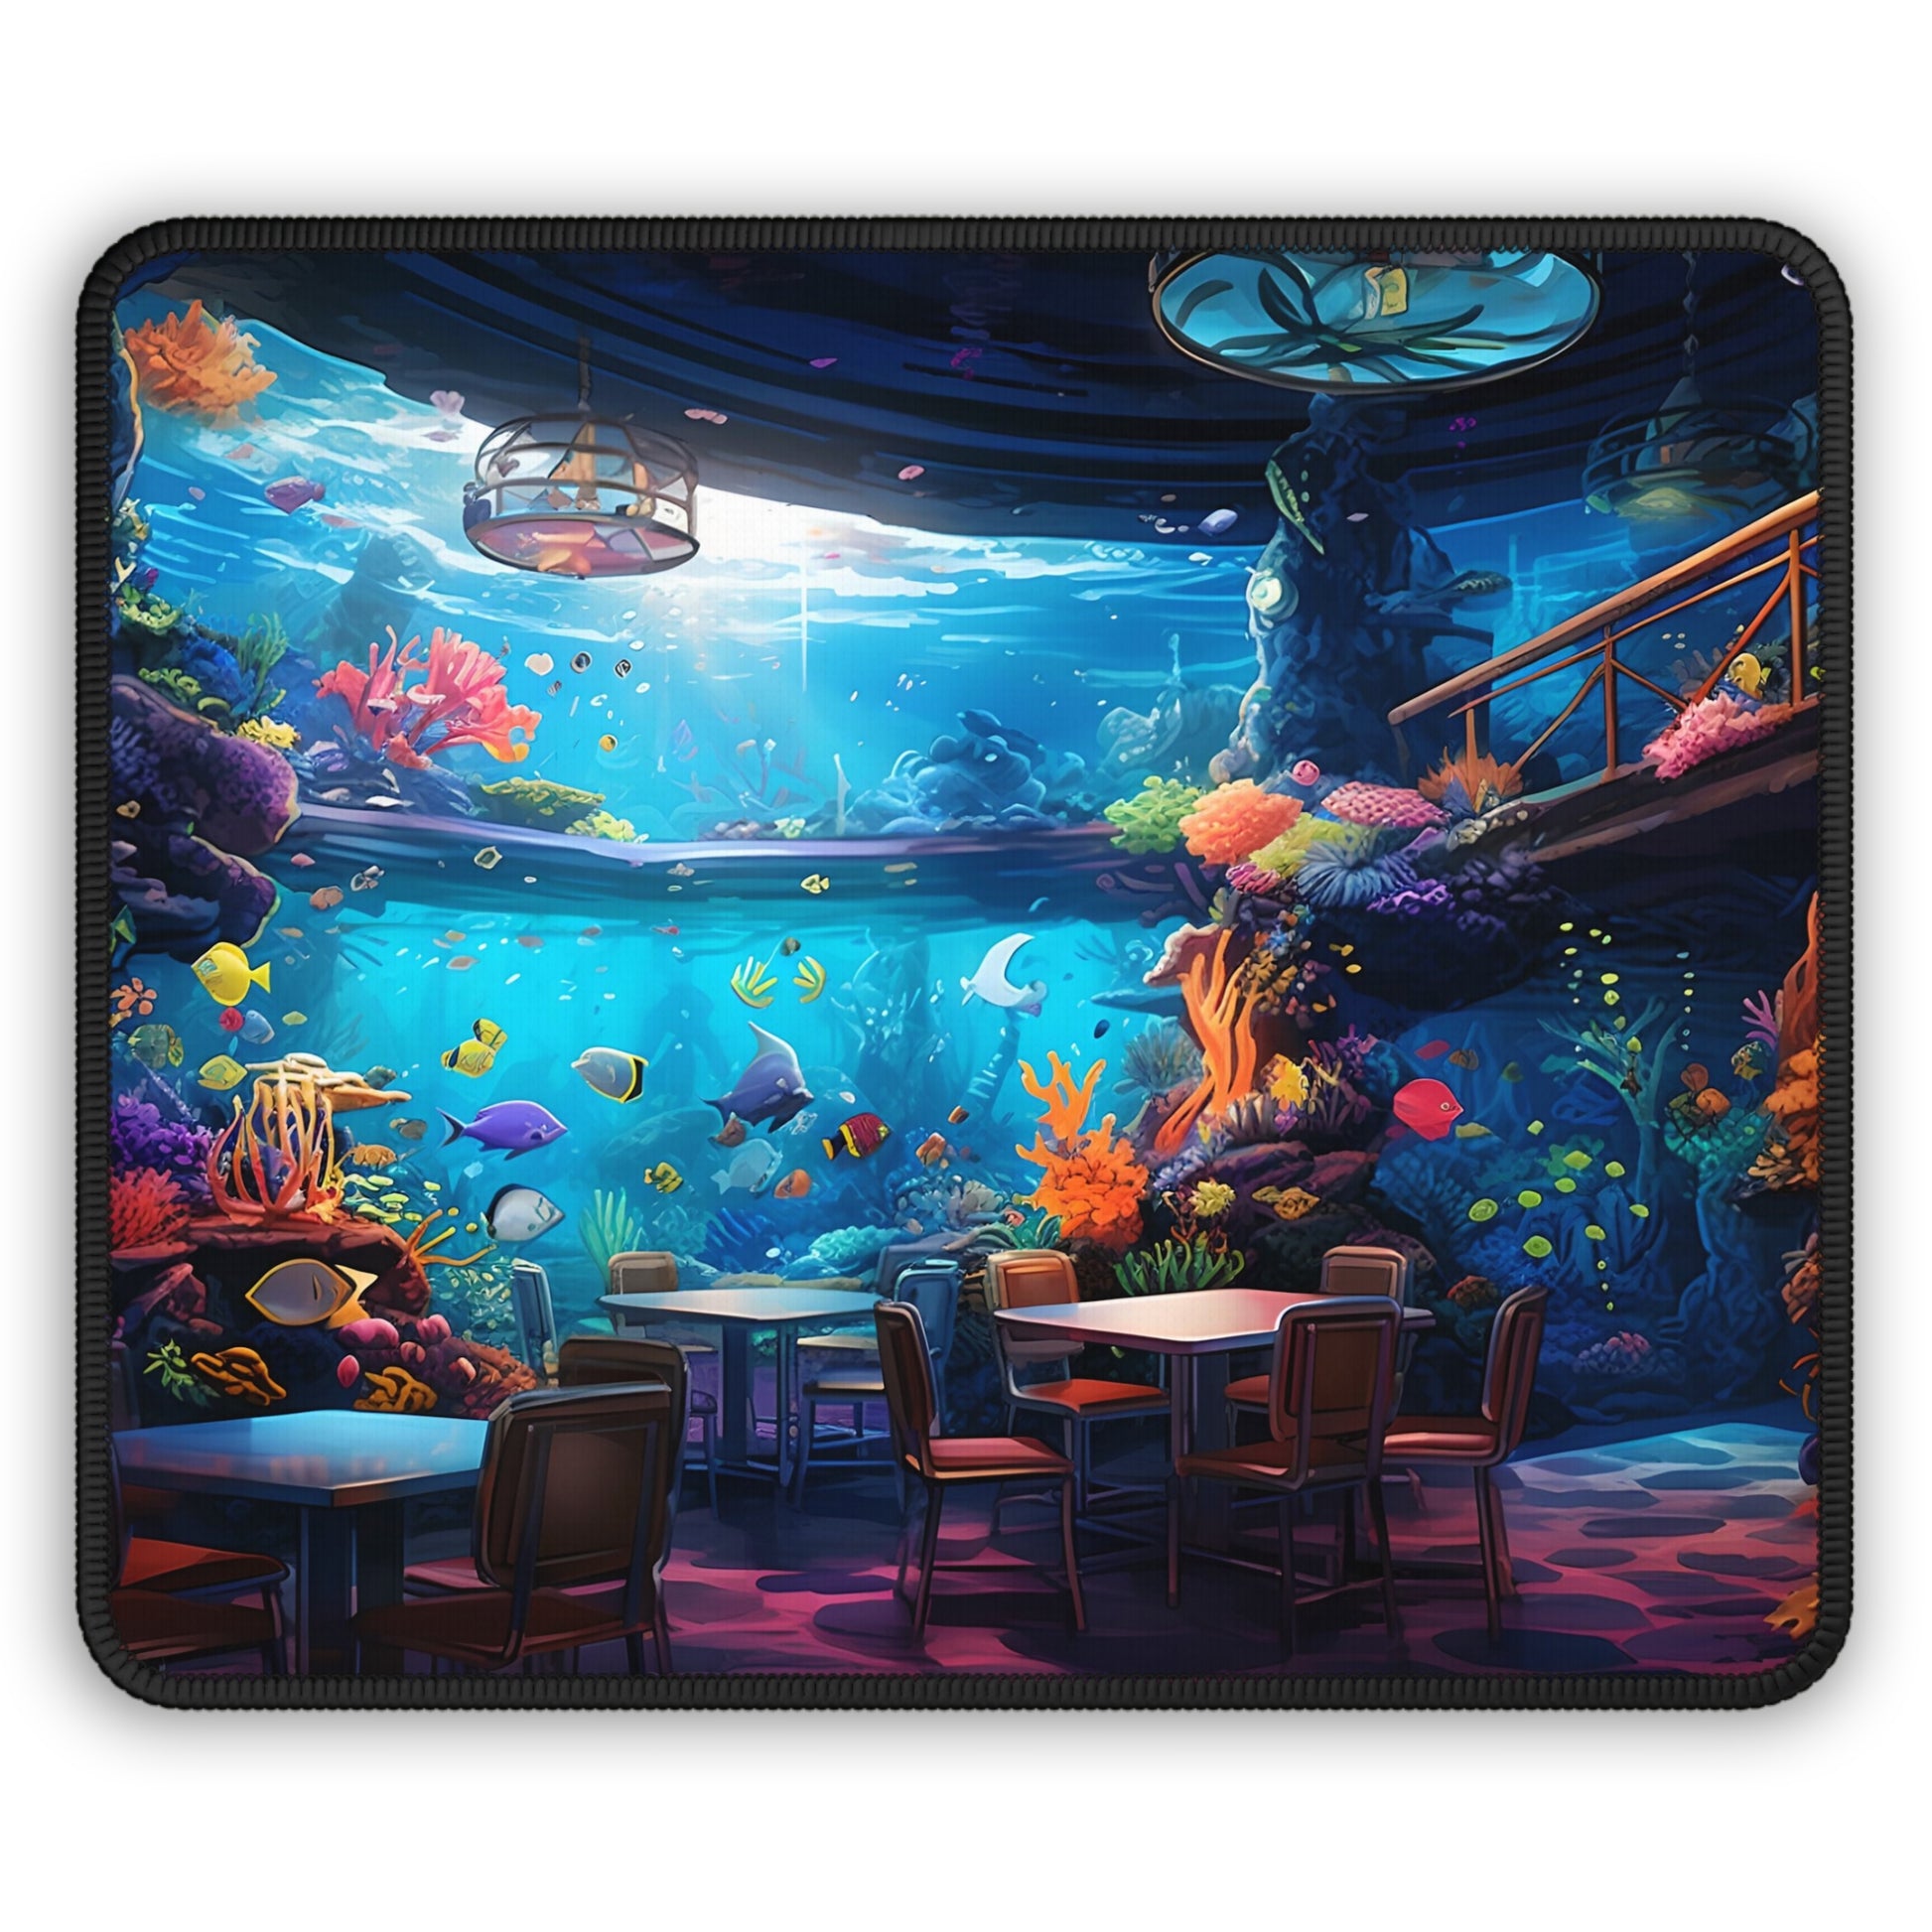 Reef Dining Experience - Reef of Clowns LLC